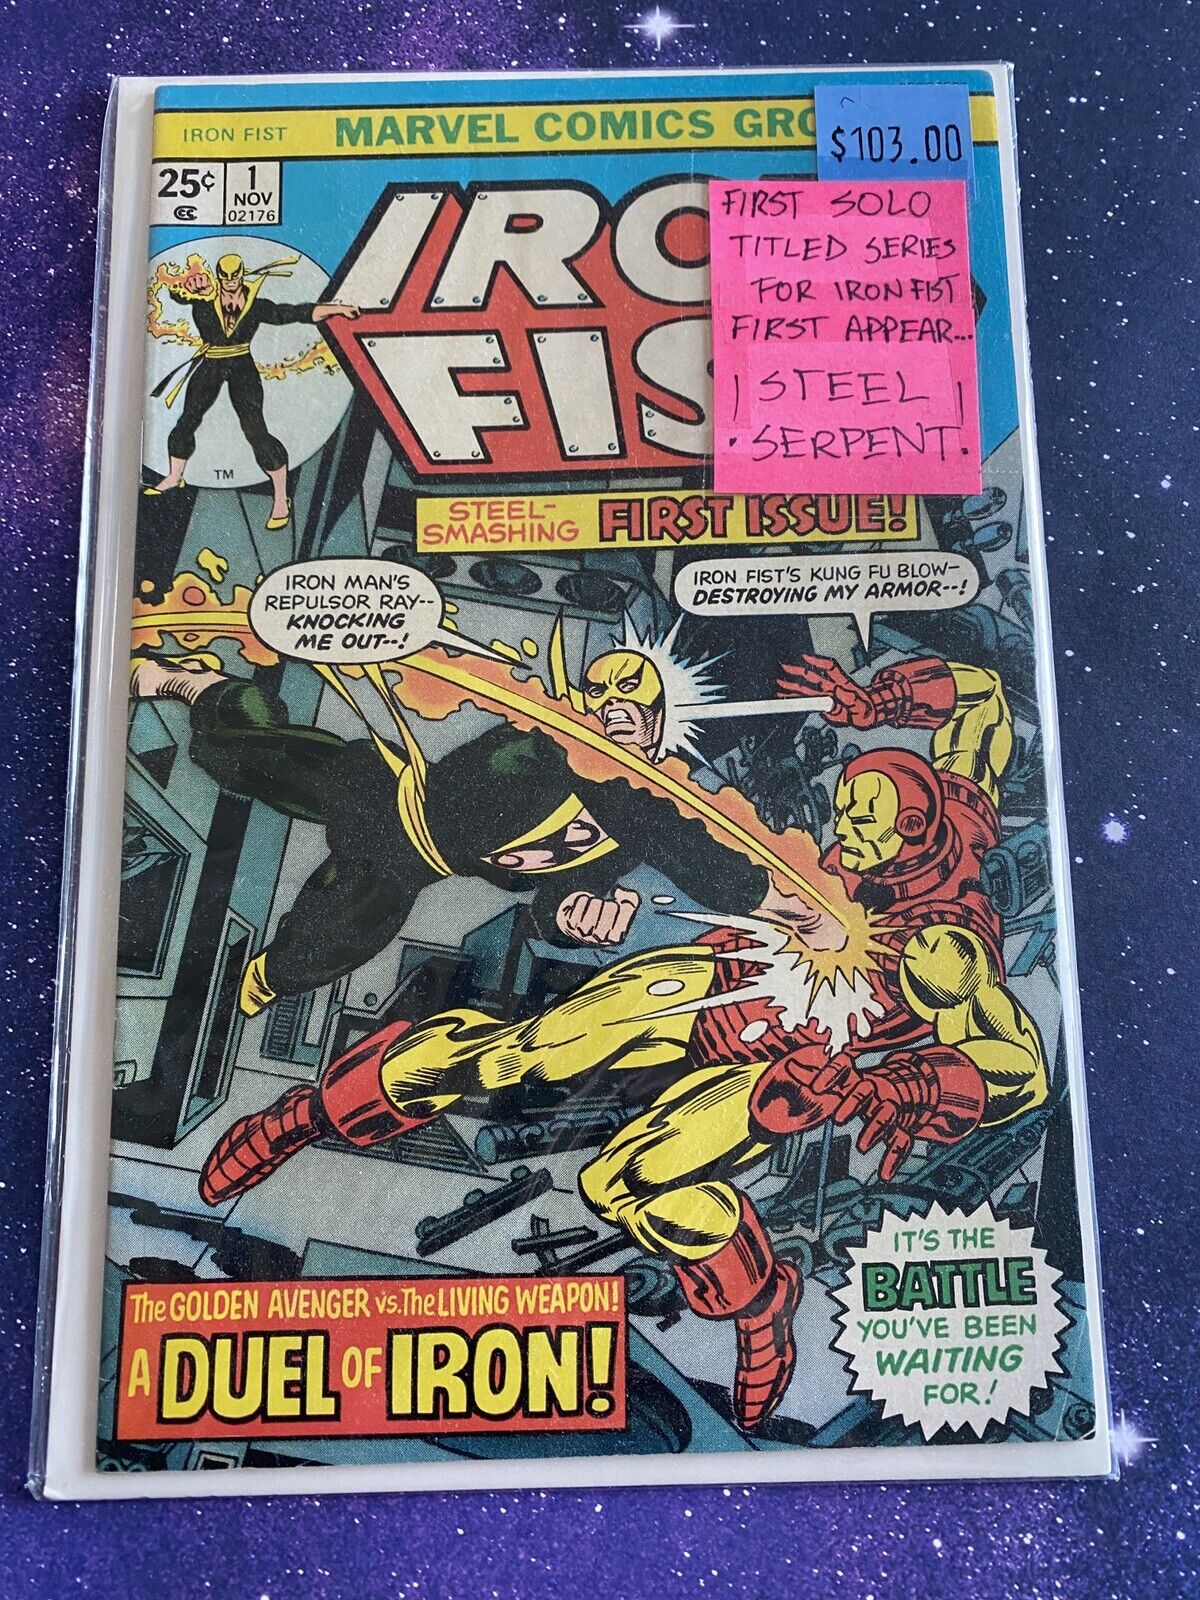 Iron Fist 1 - KEY - 1st solo titled, 1st app of Steel Serpent - 1975